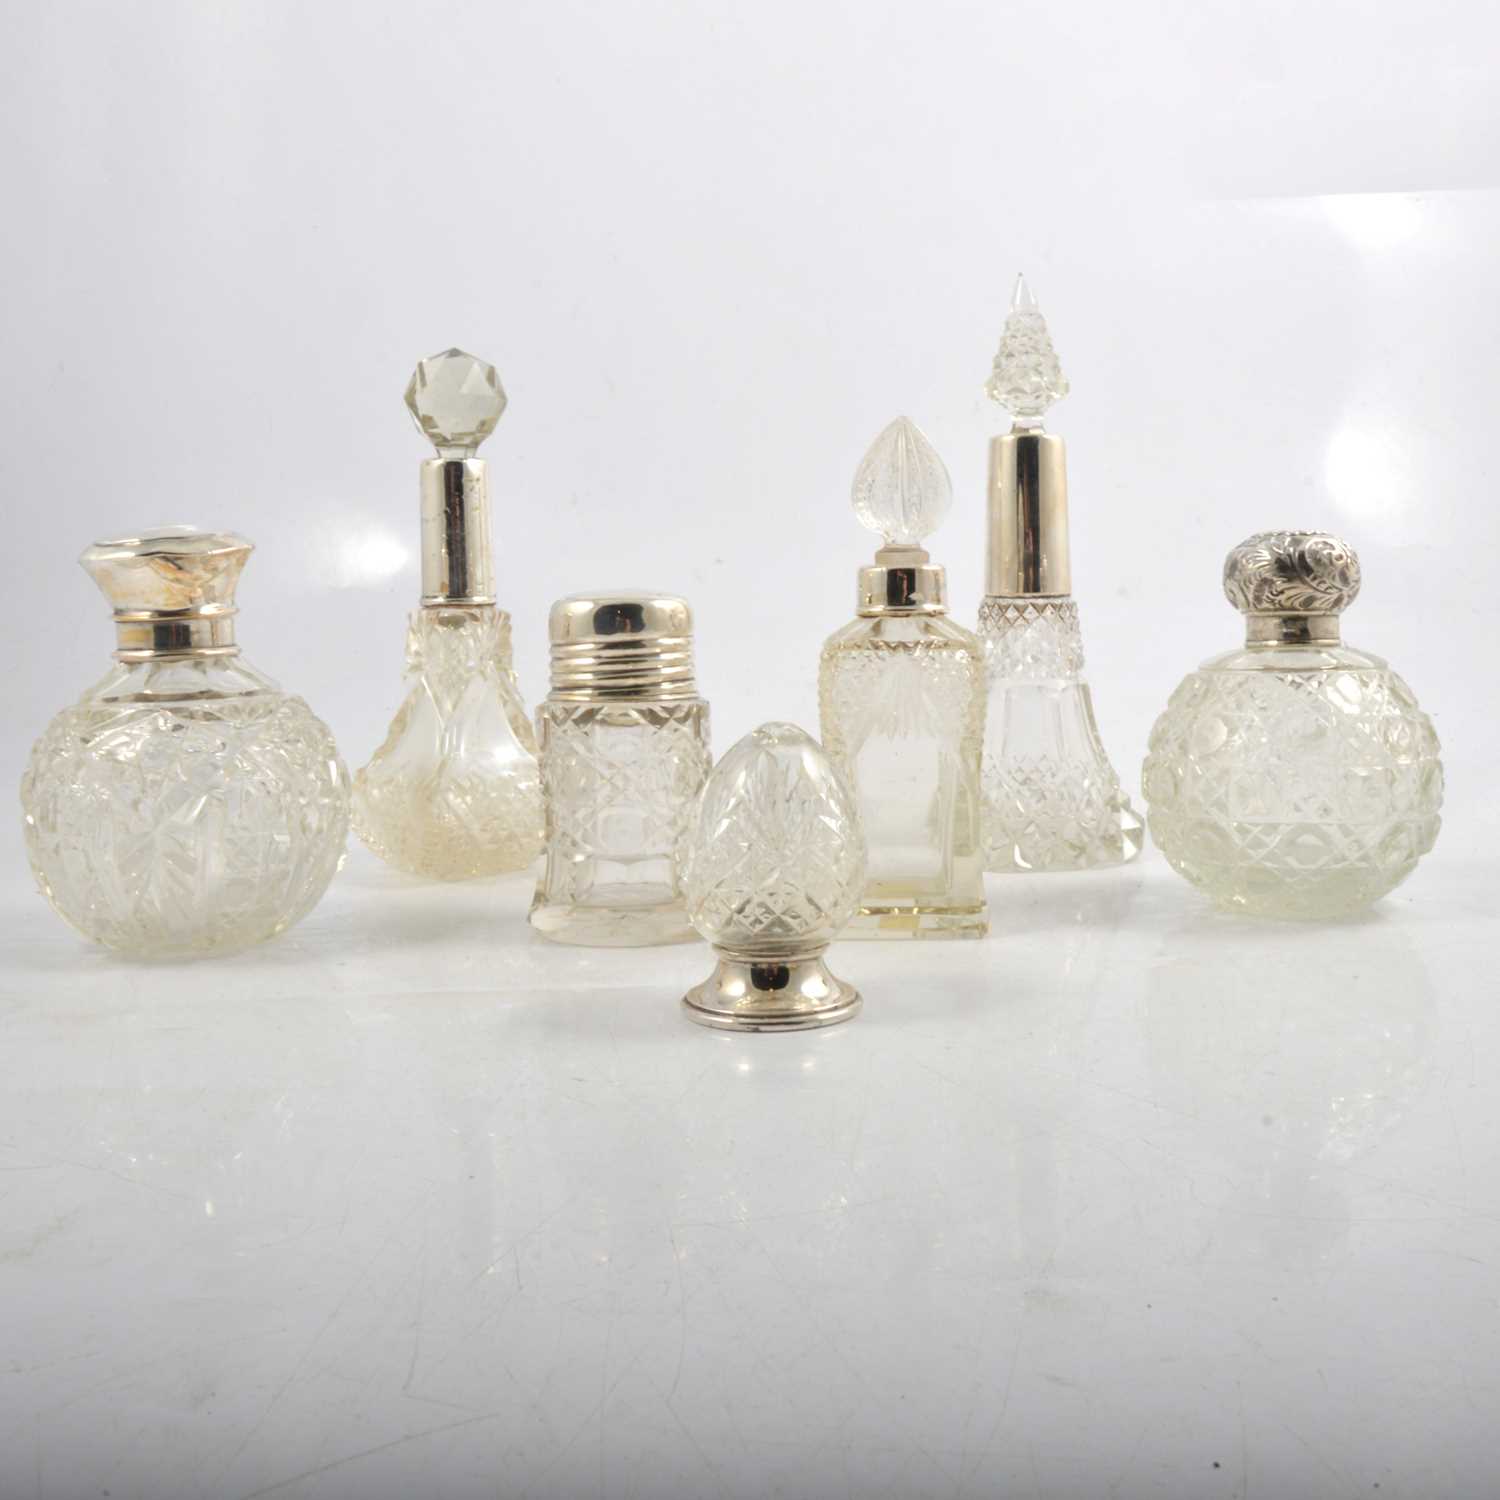 Lot 231 - UPDATED - A silver-bottomed pepperette and six silver-topped / collared cut glass scent bottles.